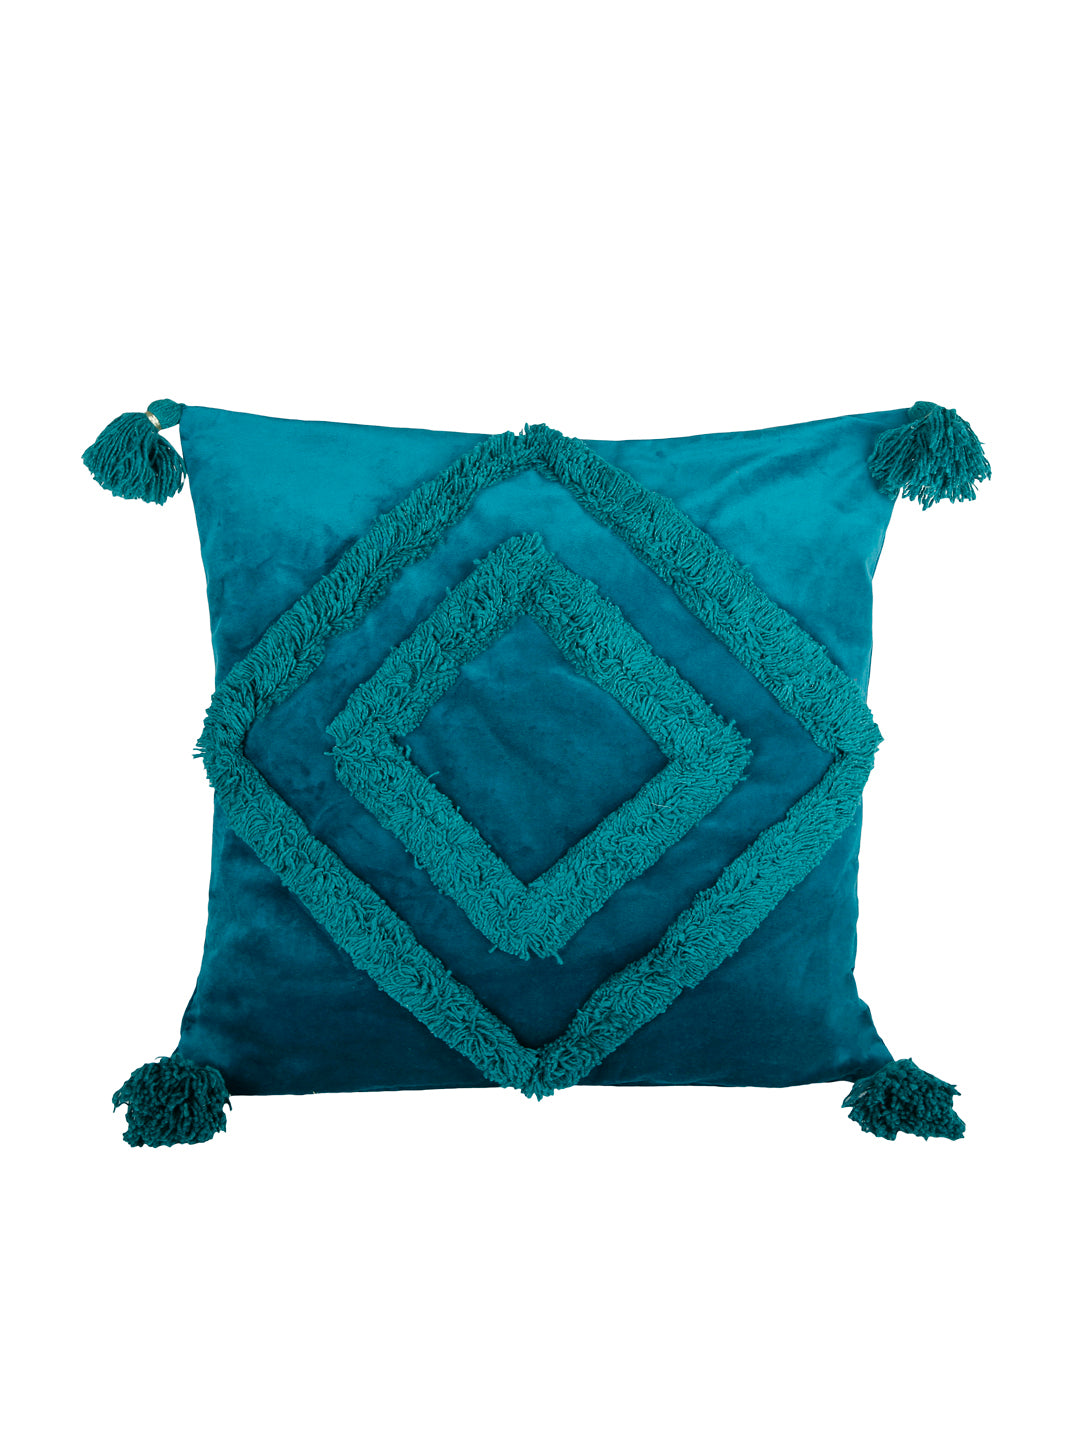 Set of 2 Teal Blue Textured Square Velvet Sustainable Cushion Covers